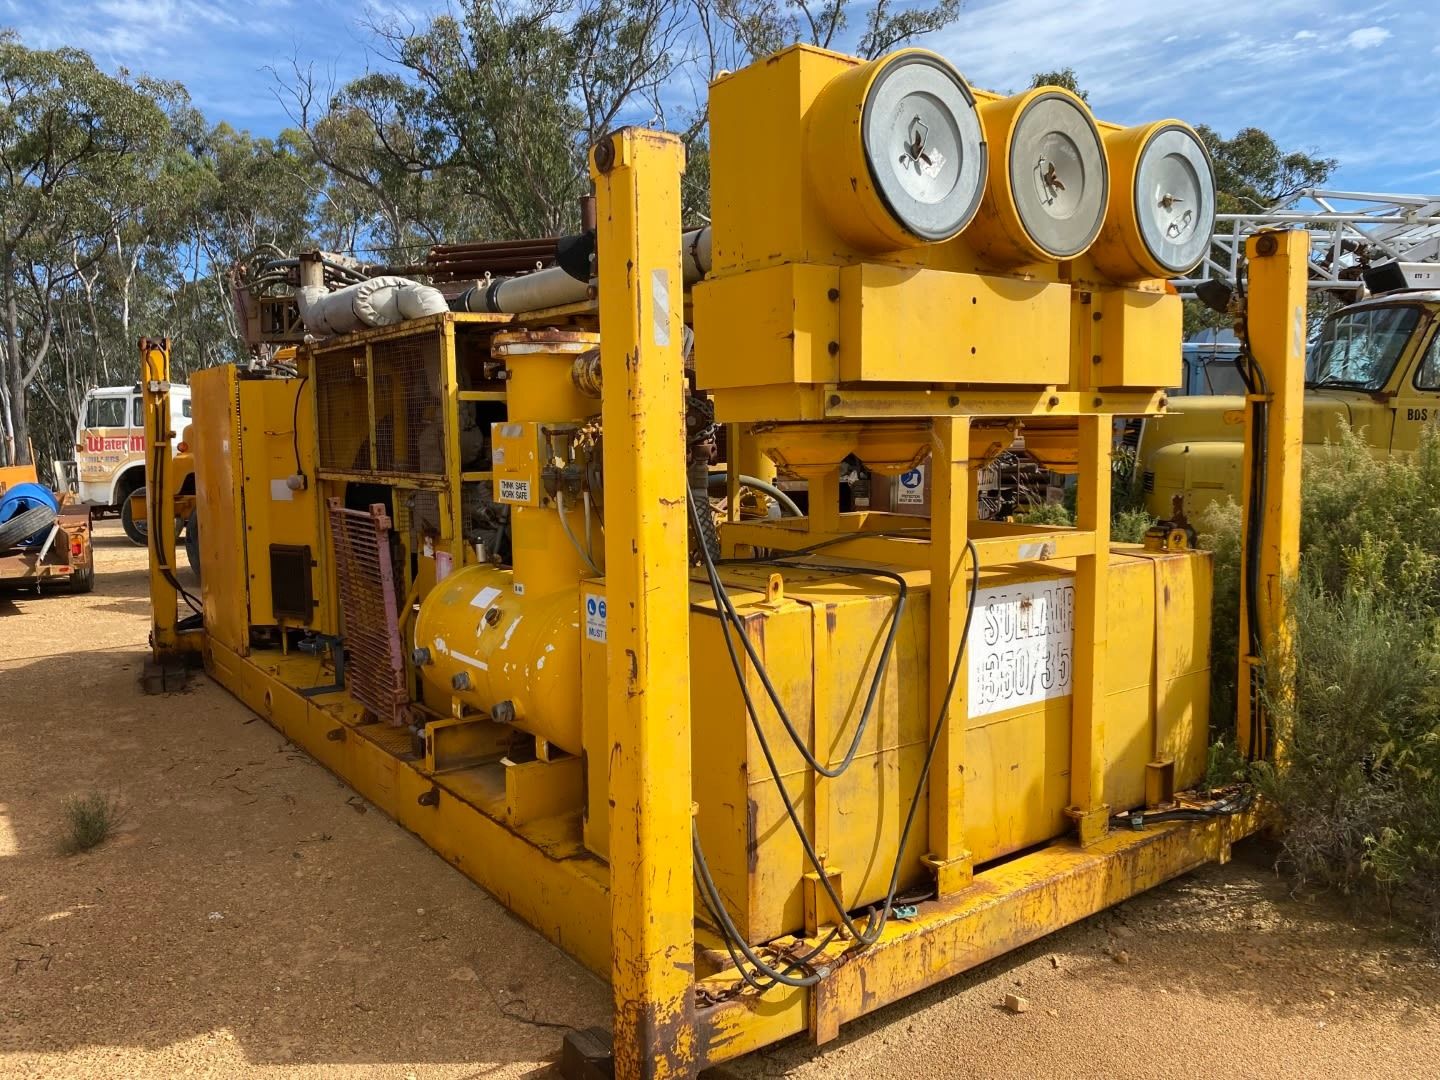 View yellow Sullair 1350/350 Compressor available via auction.